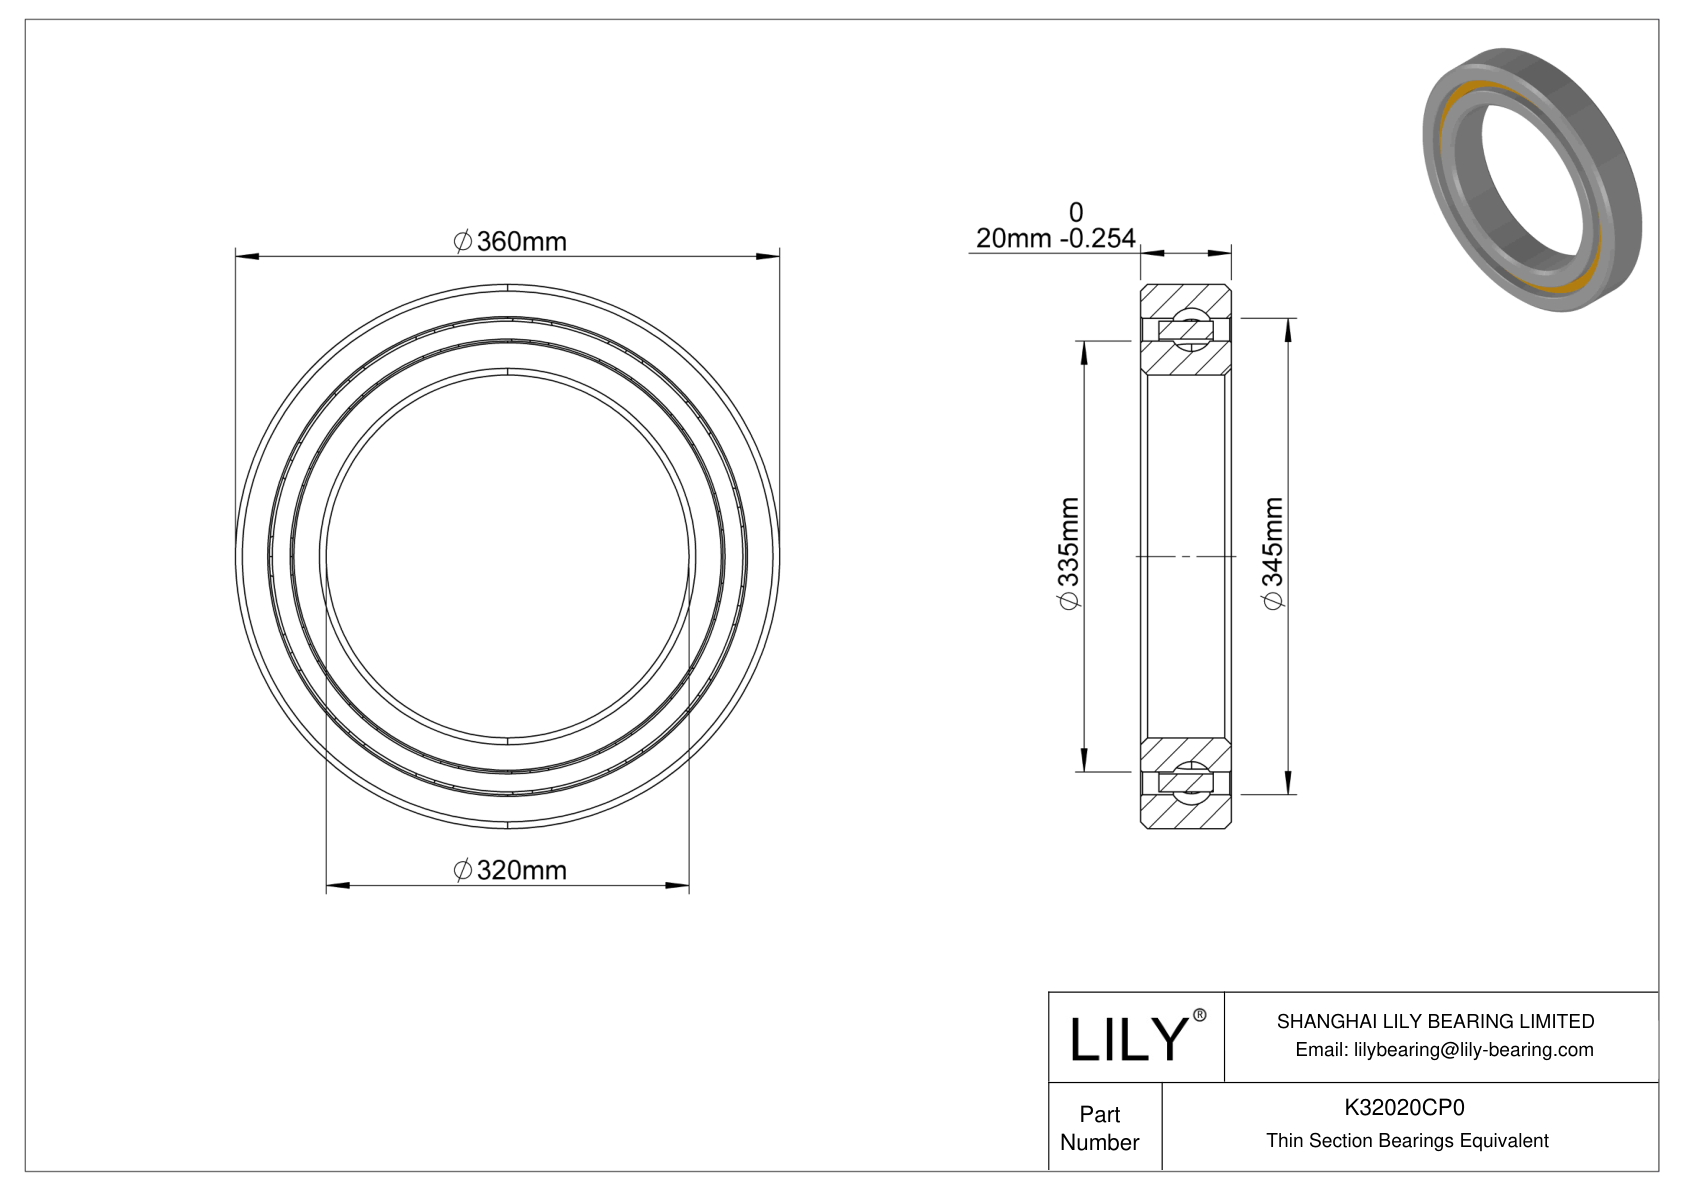 K32020CP0 Constant Section (CS) Bearings cad drawing